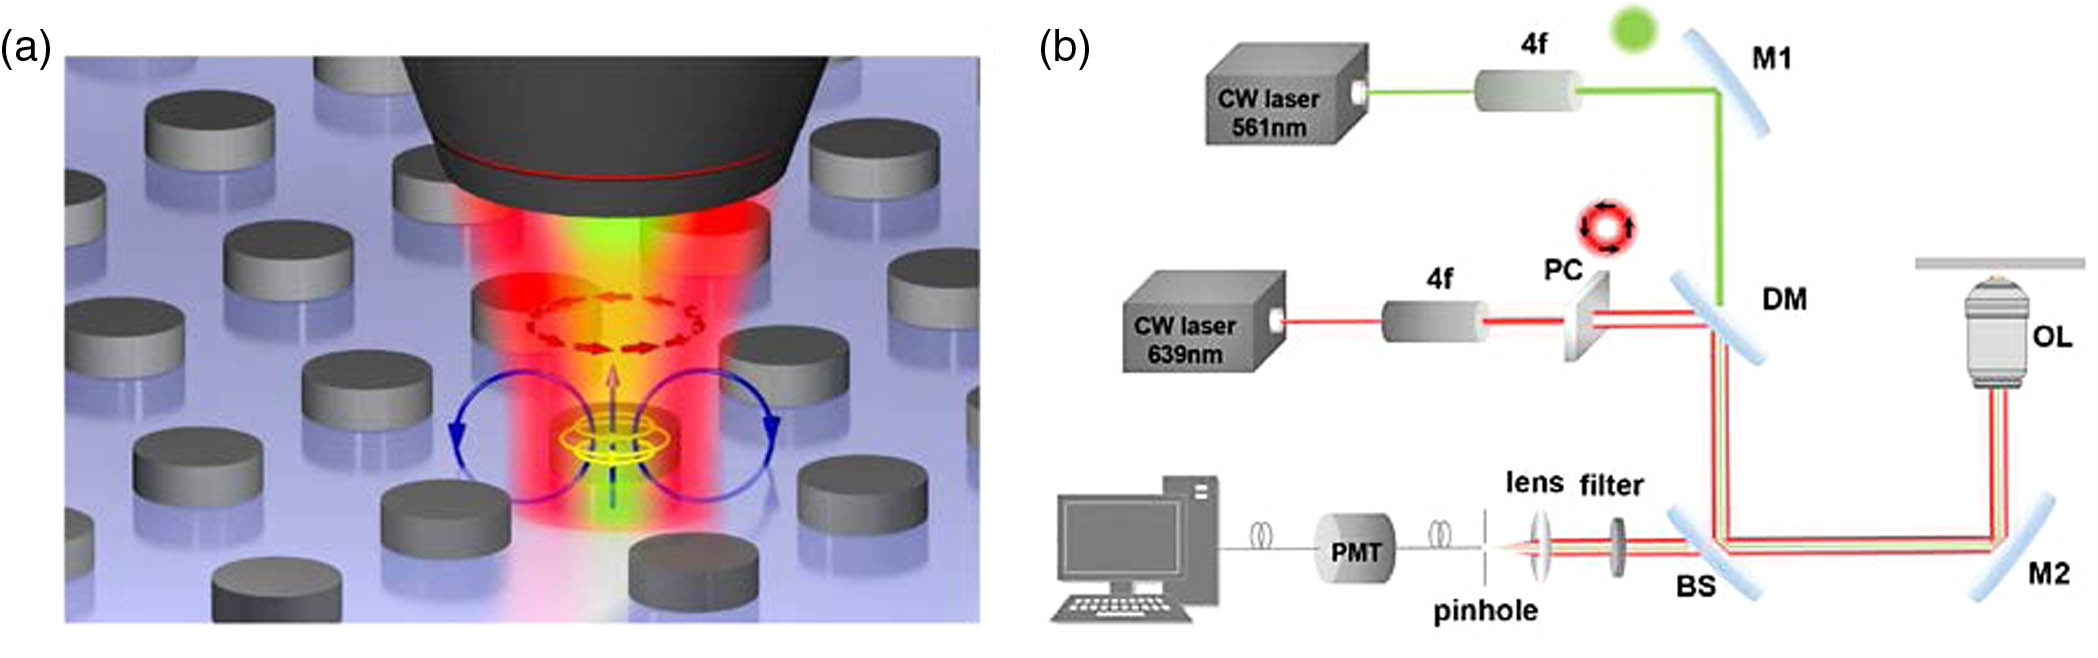 Schematic illustration of the superlocalization imaging and experimental setup. (a) The principle of superlocalization imaging is based on scattering suppression of Si nanodisks at the peripherals of the doughnut-shaped AP saturation beam. (b) Diagram of the reflectance laser scanning confocal system. M1, M2, silver mirrors; DM, dichroic mirror; BS, beam splitter; OL, objective lens; PC, polarization converter.